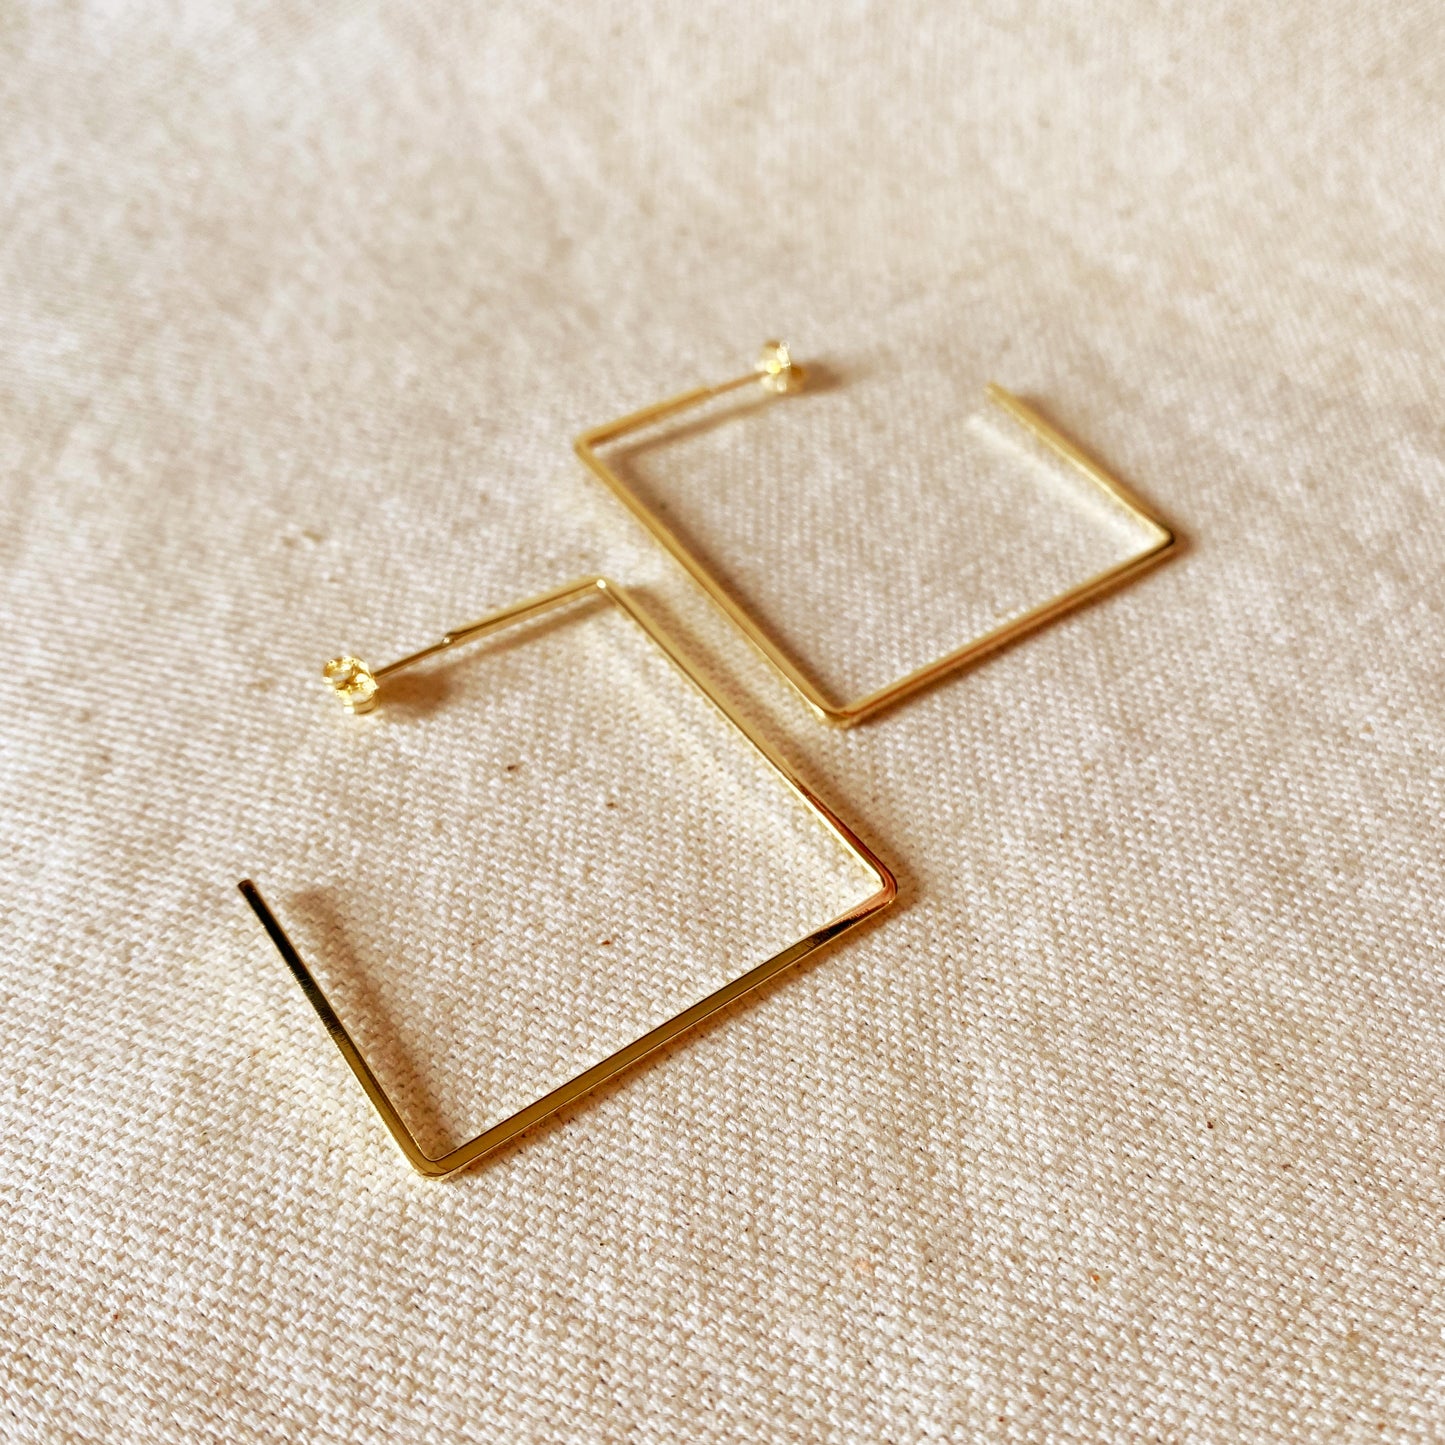 18k Gold Filled Square Shaped Wire Half Hoop Earrings